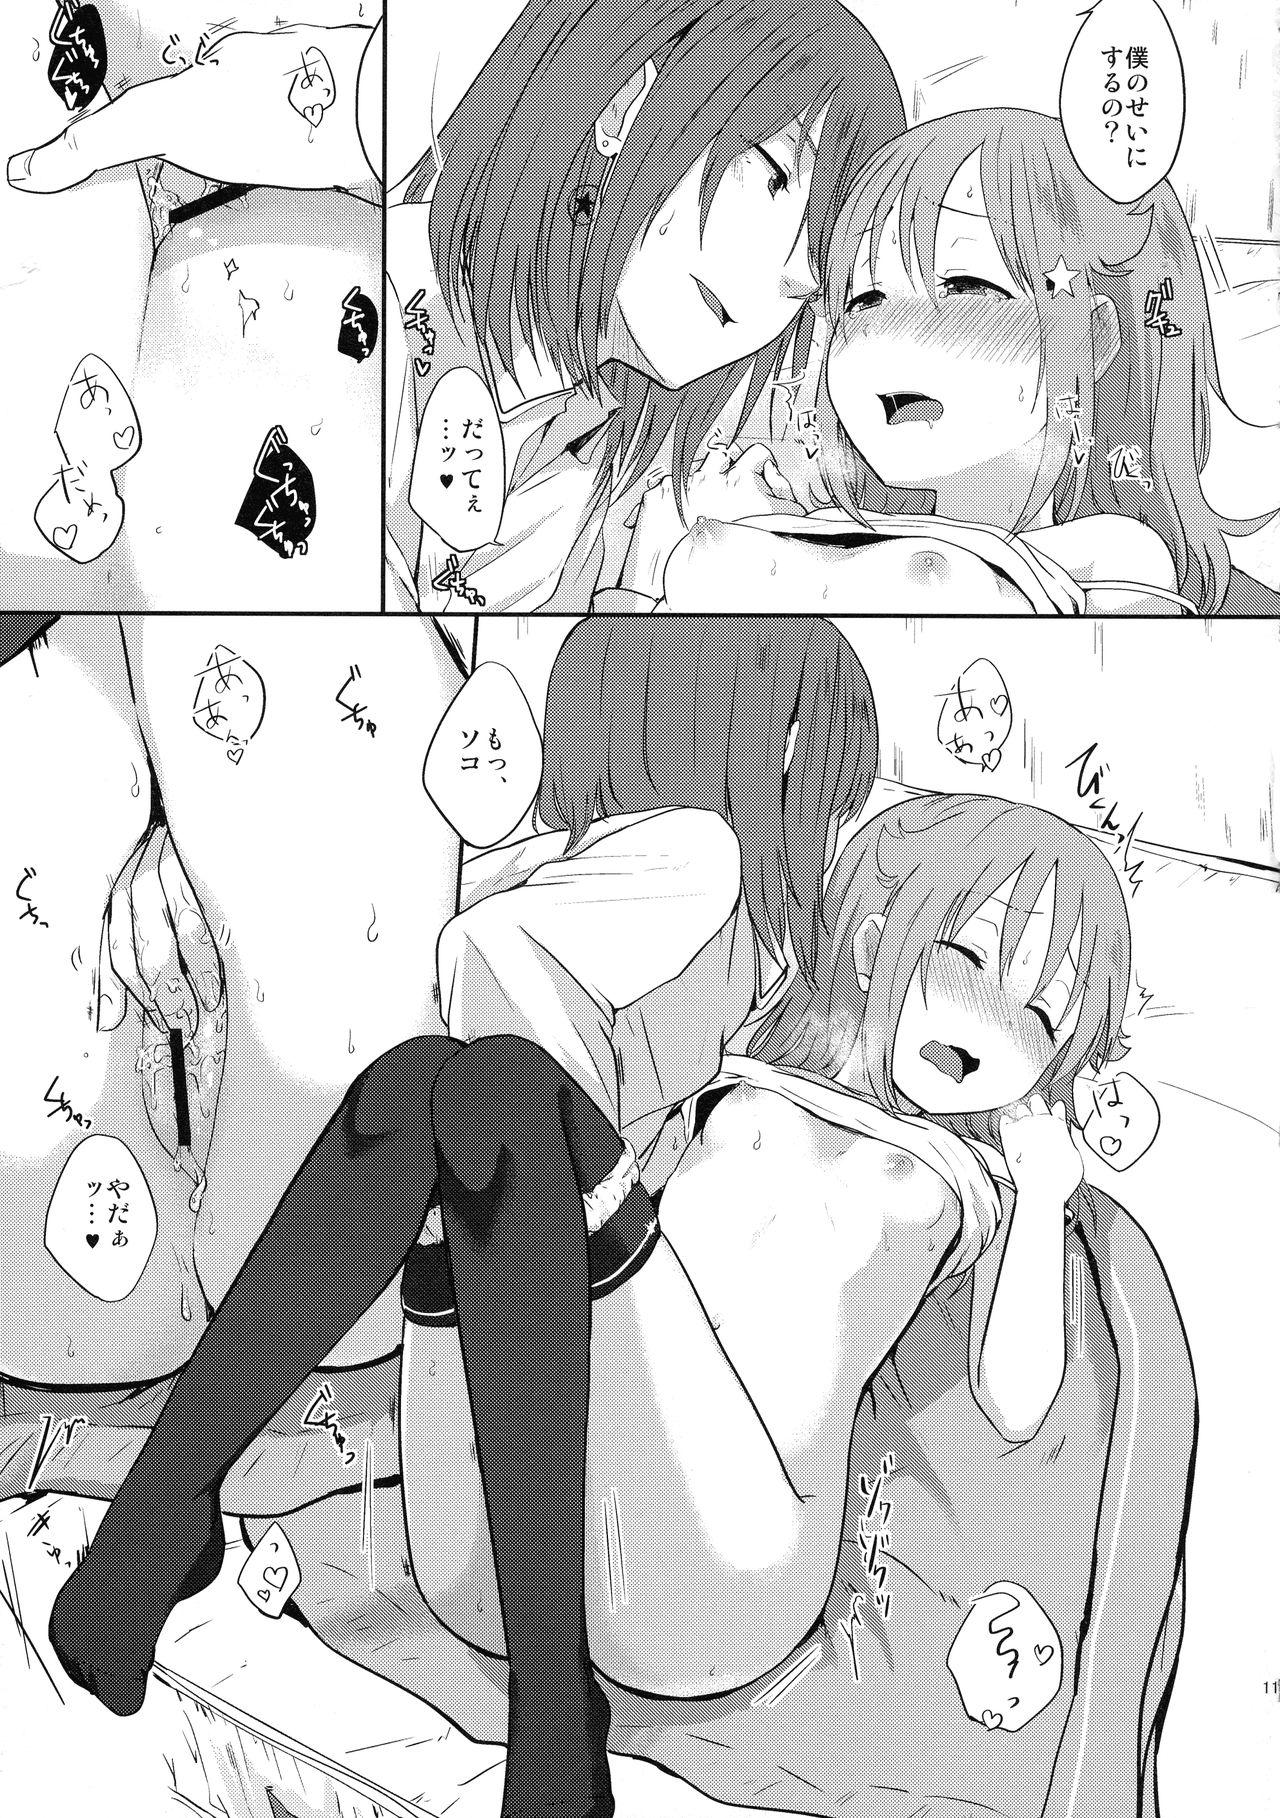 Young Old Nowhere land 1 - Houkago no pleiades Celebrity Sex Scene - Page 11